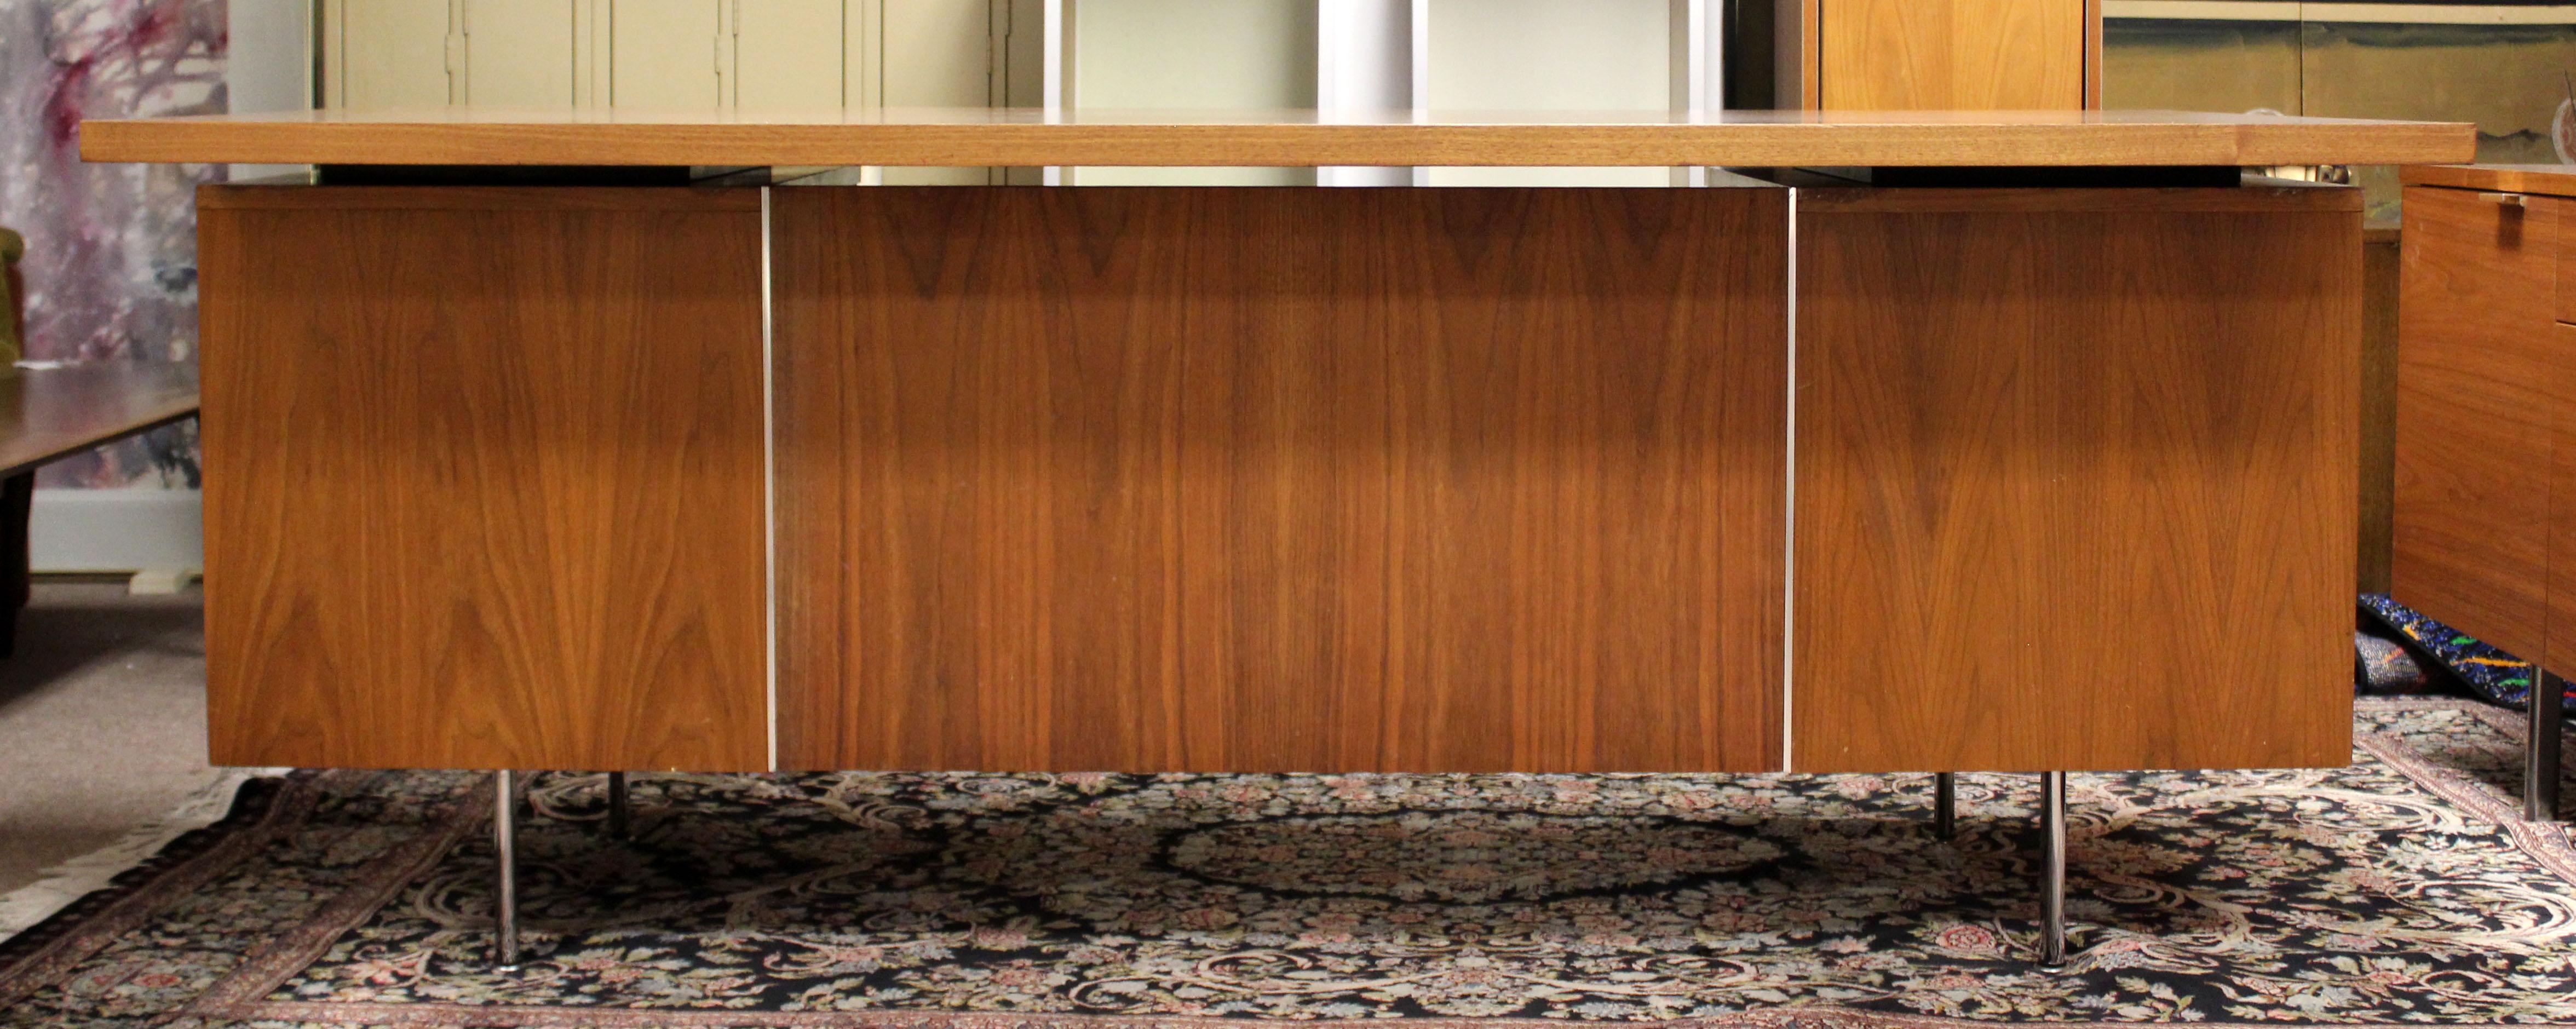 For your consideration are a wonderful credenza and executive desk, both made of walnut, by George Nelson for Herman Miller, circa 1950s. The desk has five drawers, and the credenza has four drawers and two shelves. The dimensions of the desk are